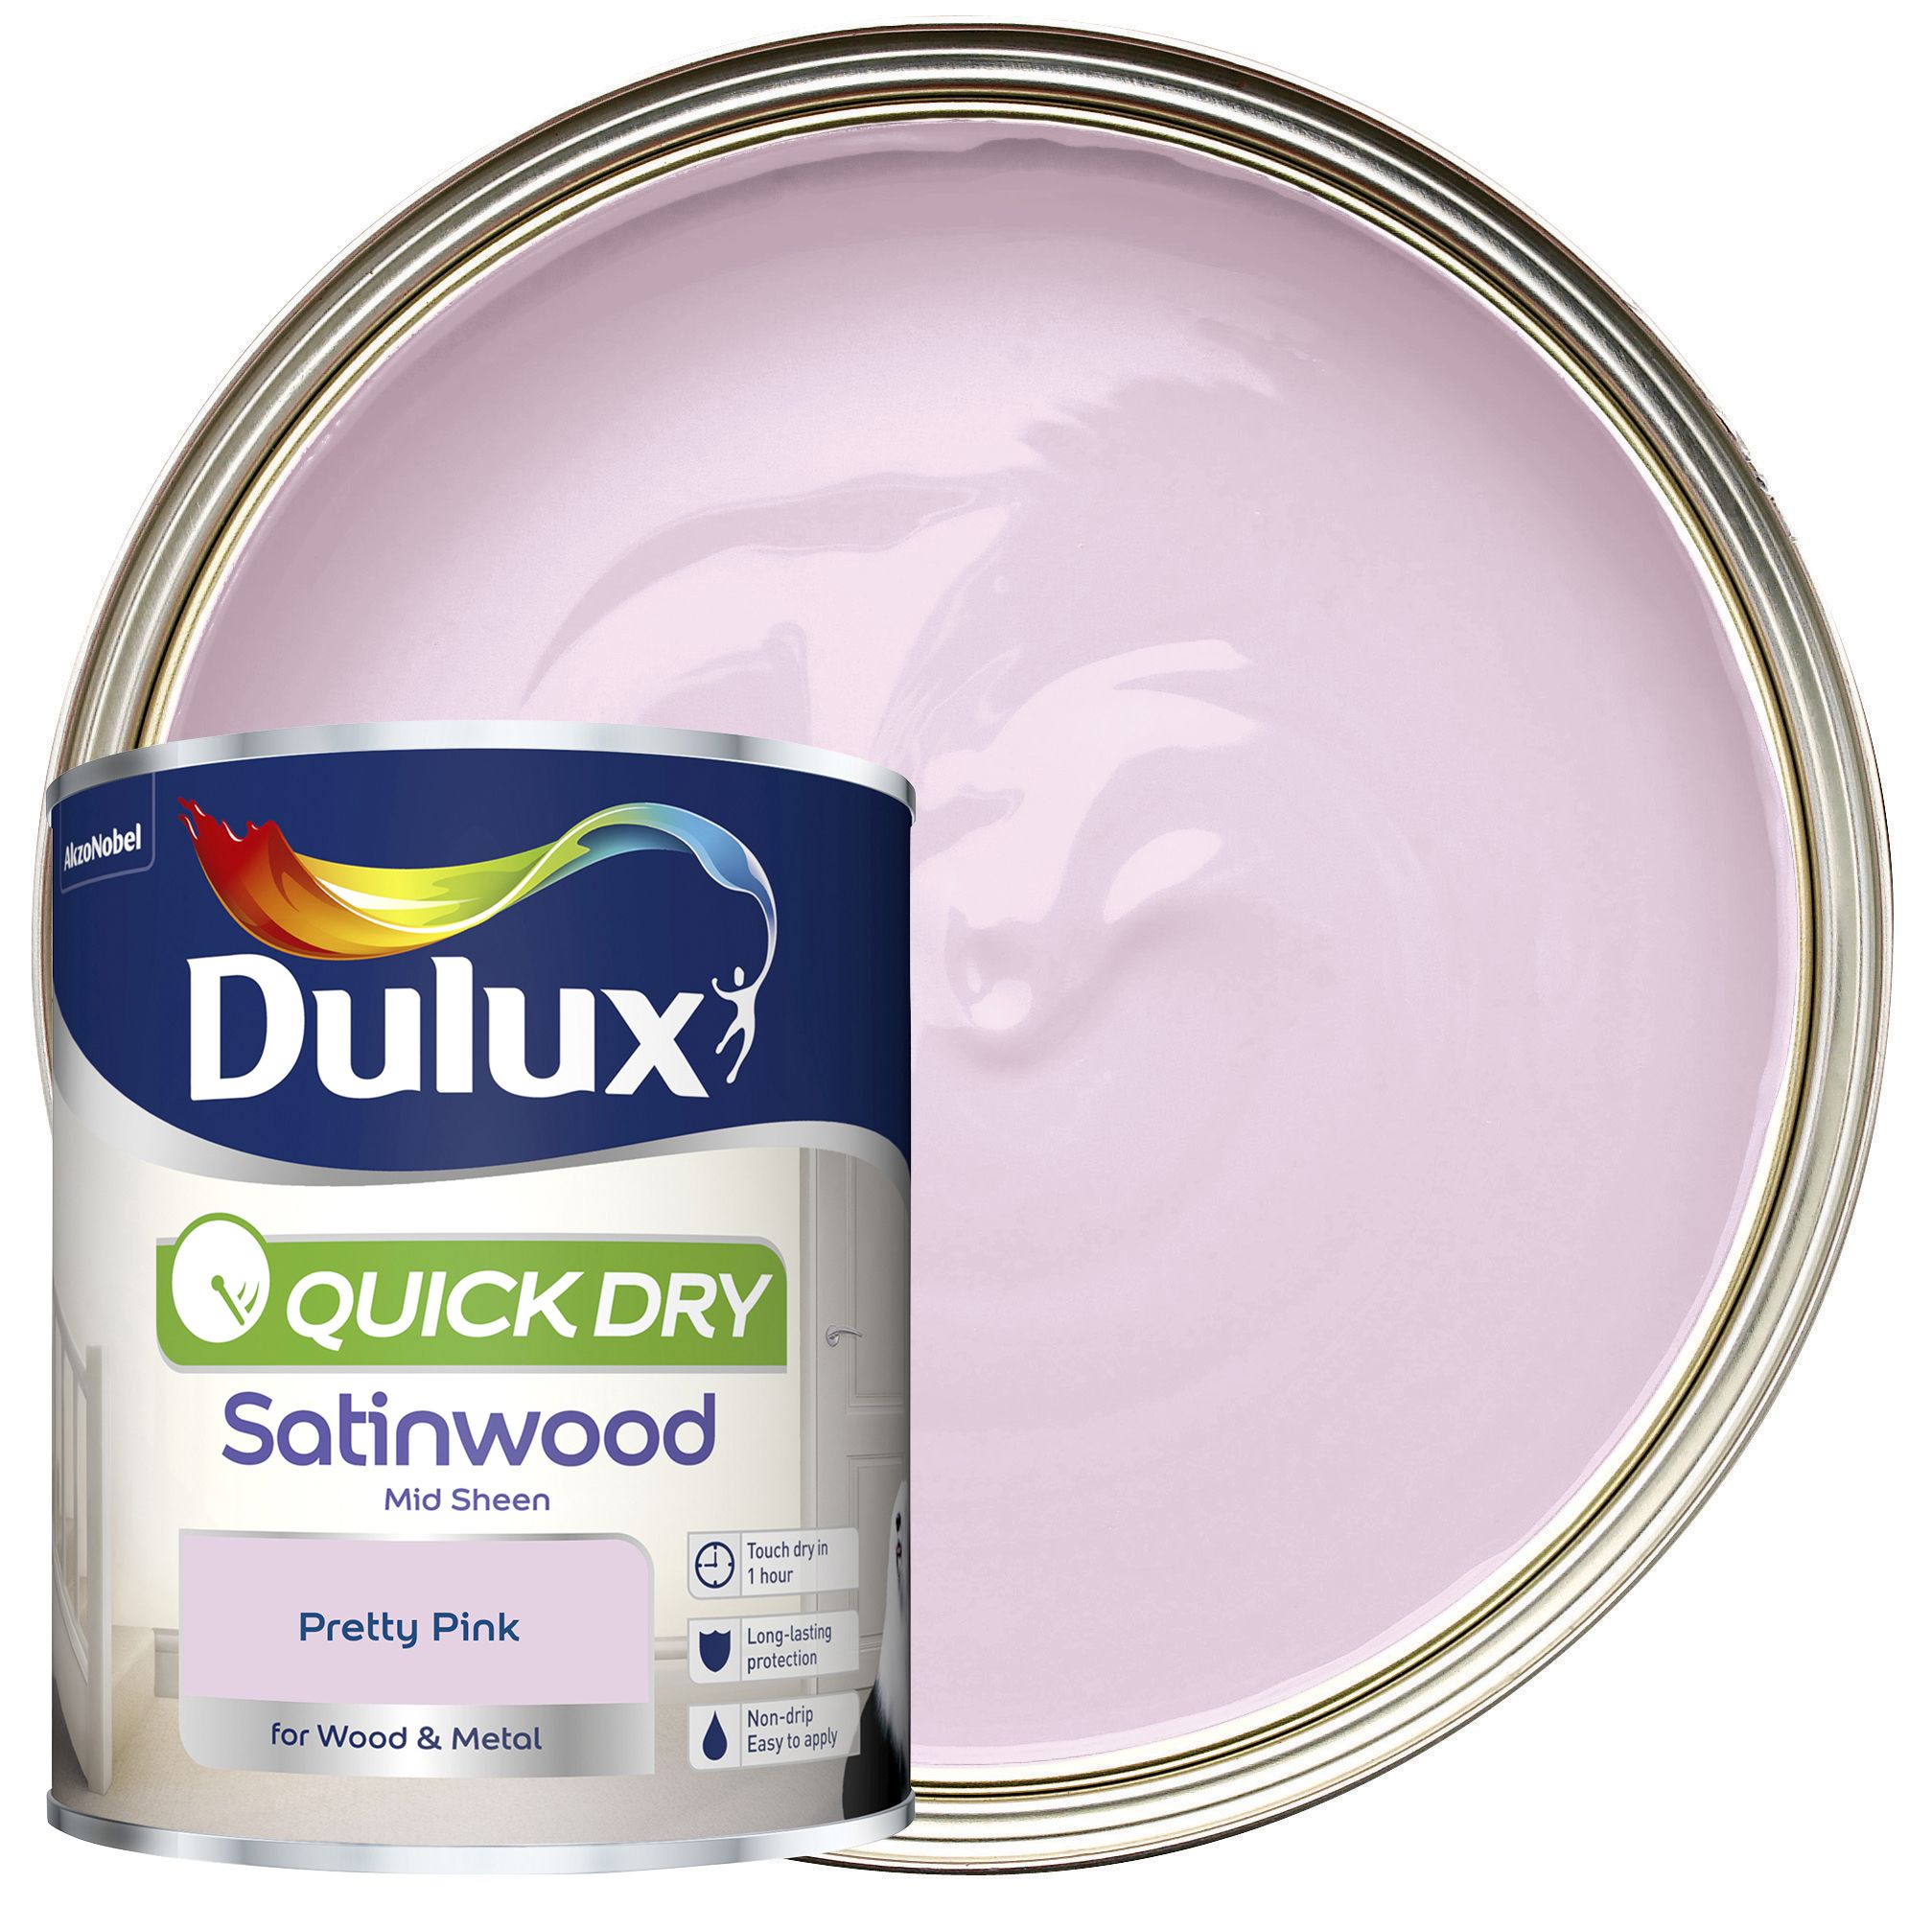 Image of Dulux Quick Drying Satinwood Paint - Pretty Pink - 750ml